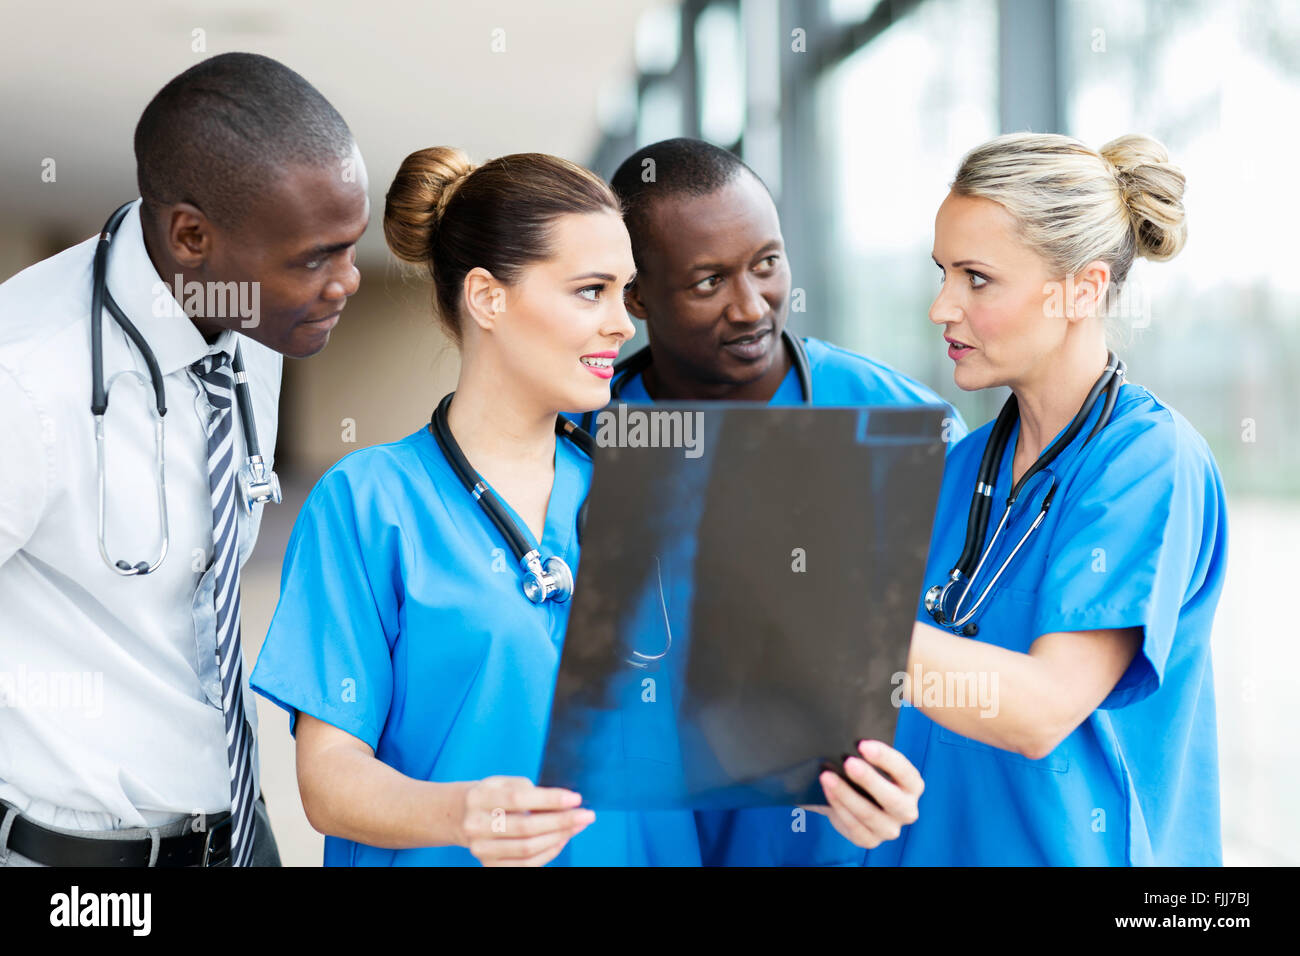 group of professional medical workers discussing patient's x-ray Stock Photo